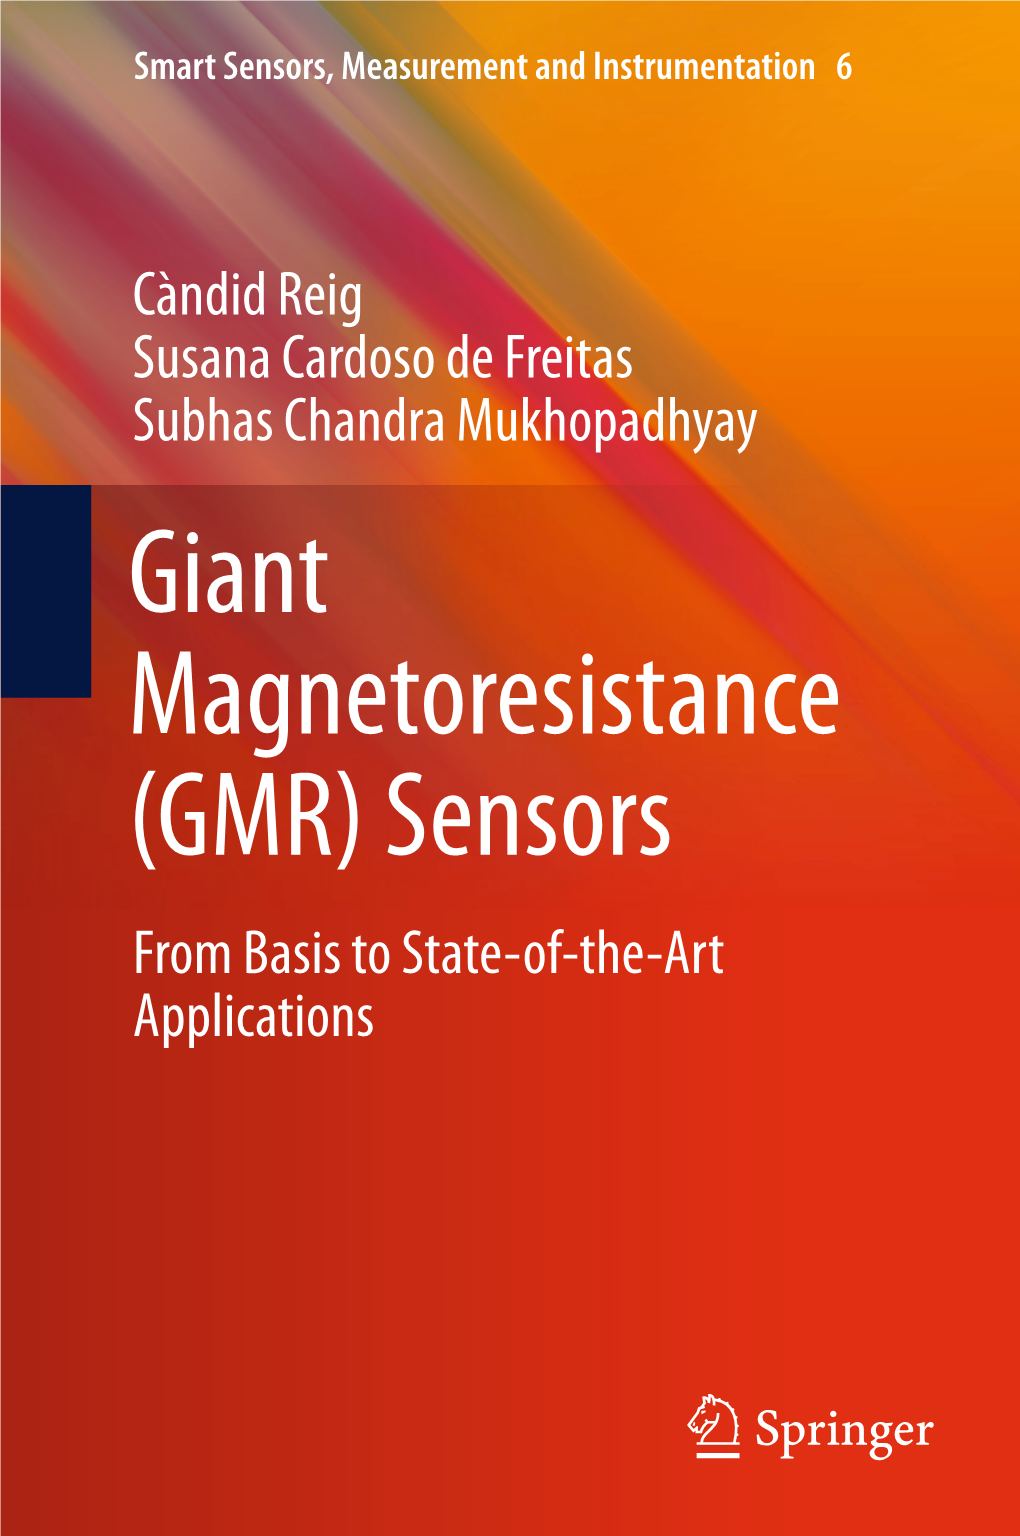 Giant Magnetoresistance (GMR) Sensors from Basis to State-Of-The-Art Applications Smart Sensors, Measurement and Instrumentation